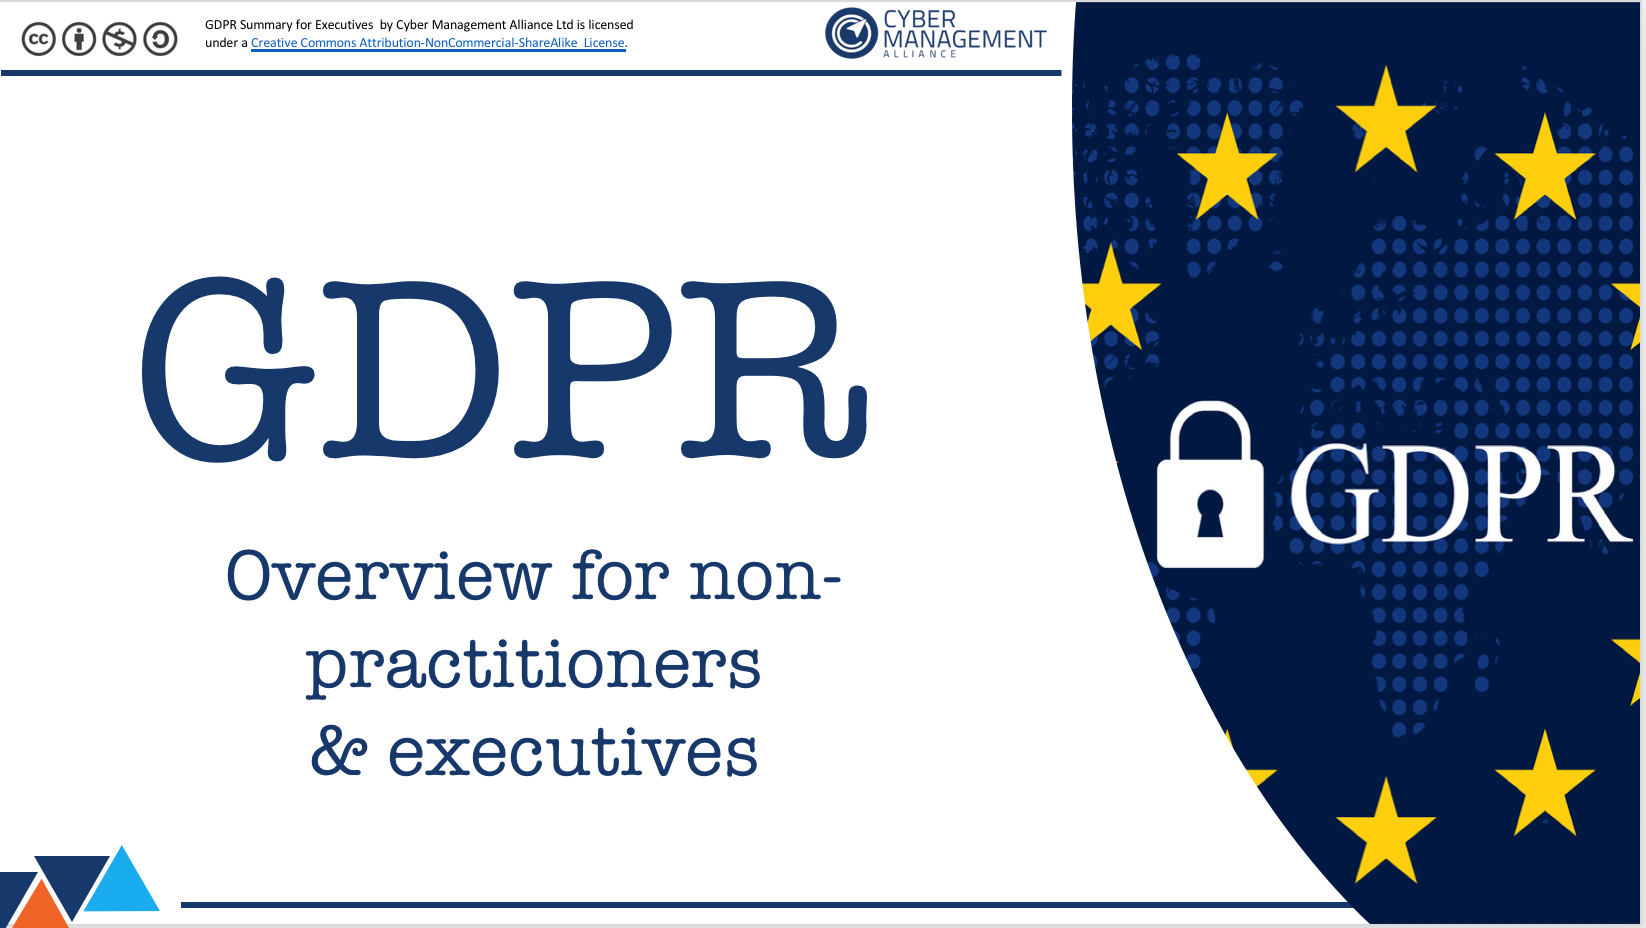 GDPR Summary for Executives.png